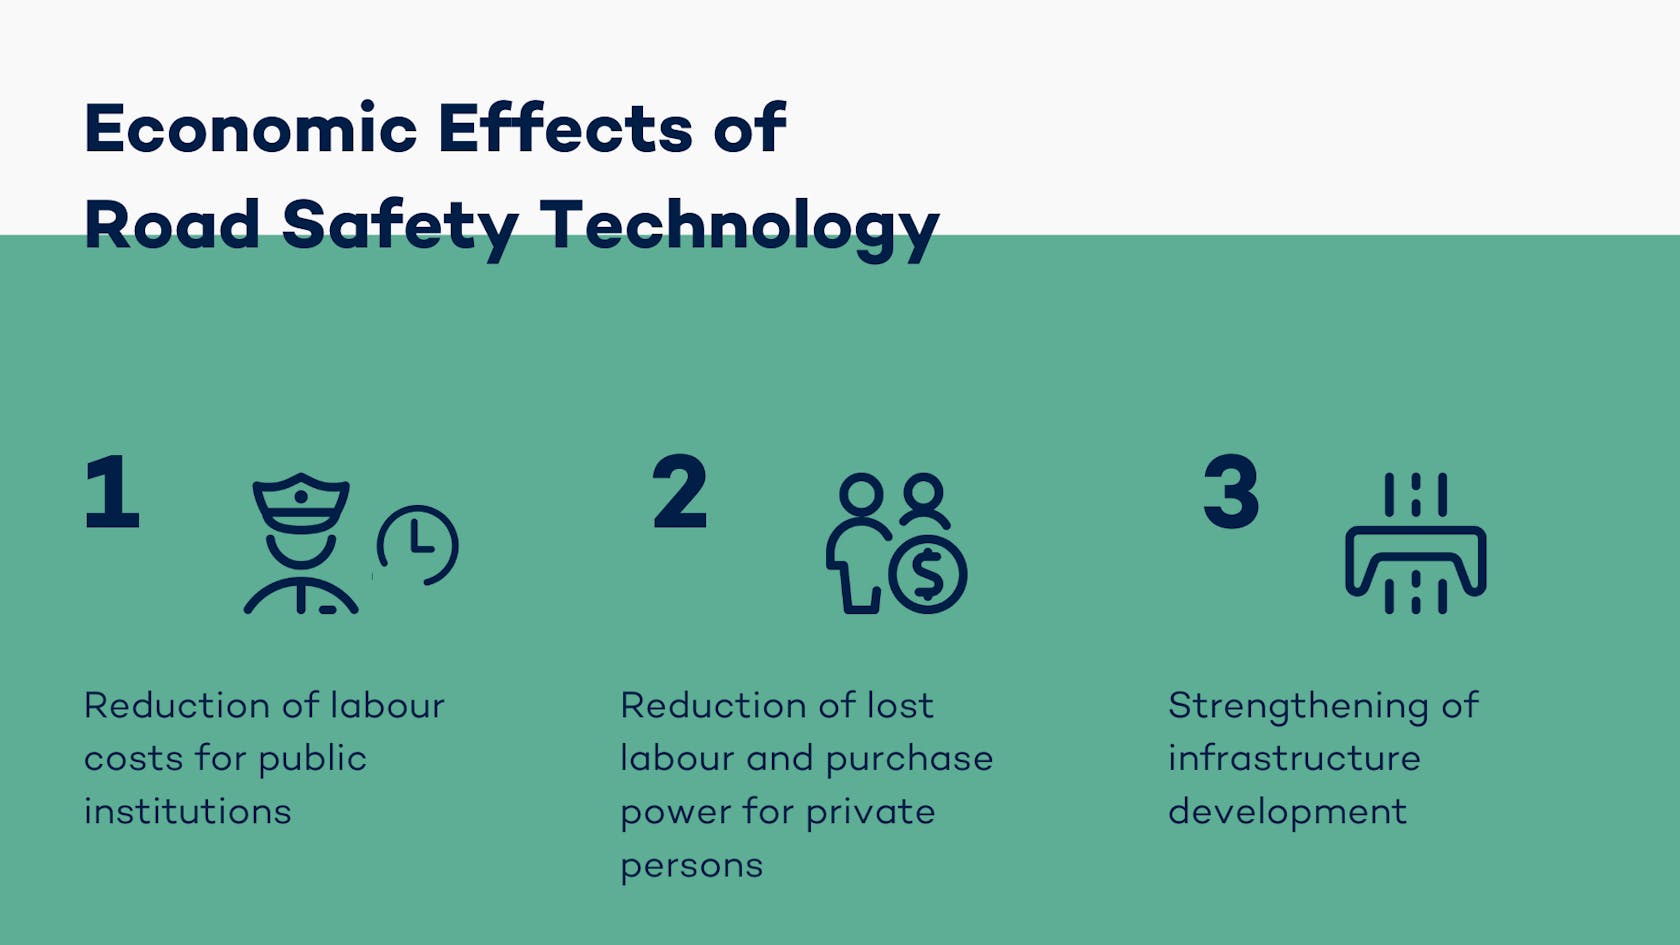 Economic Effects of Road Safety Technology